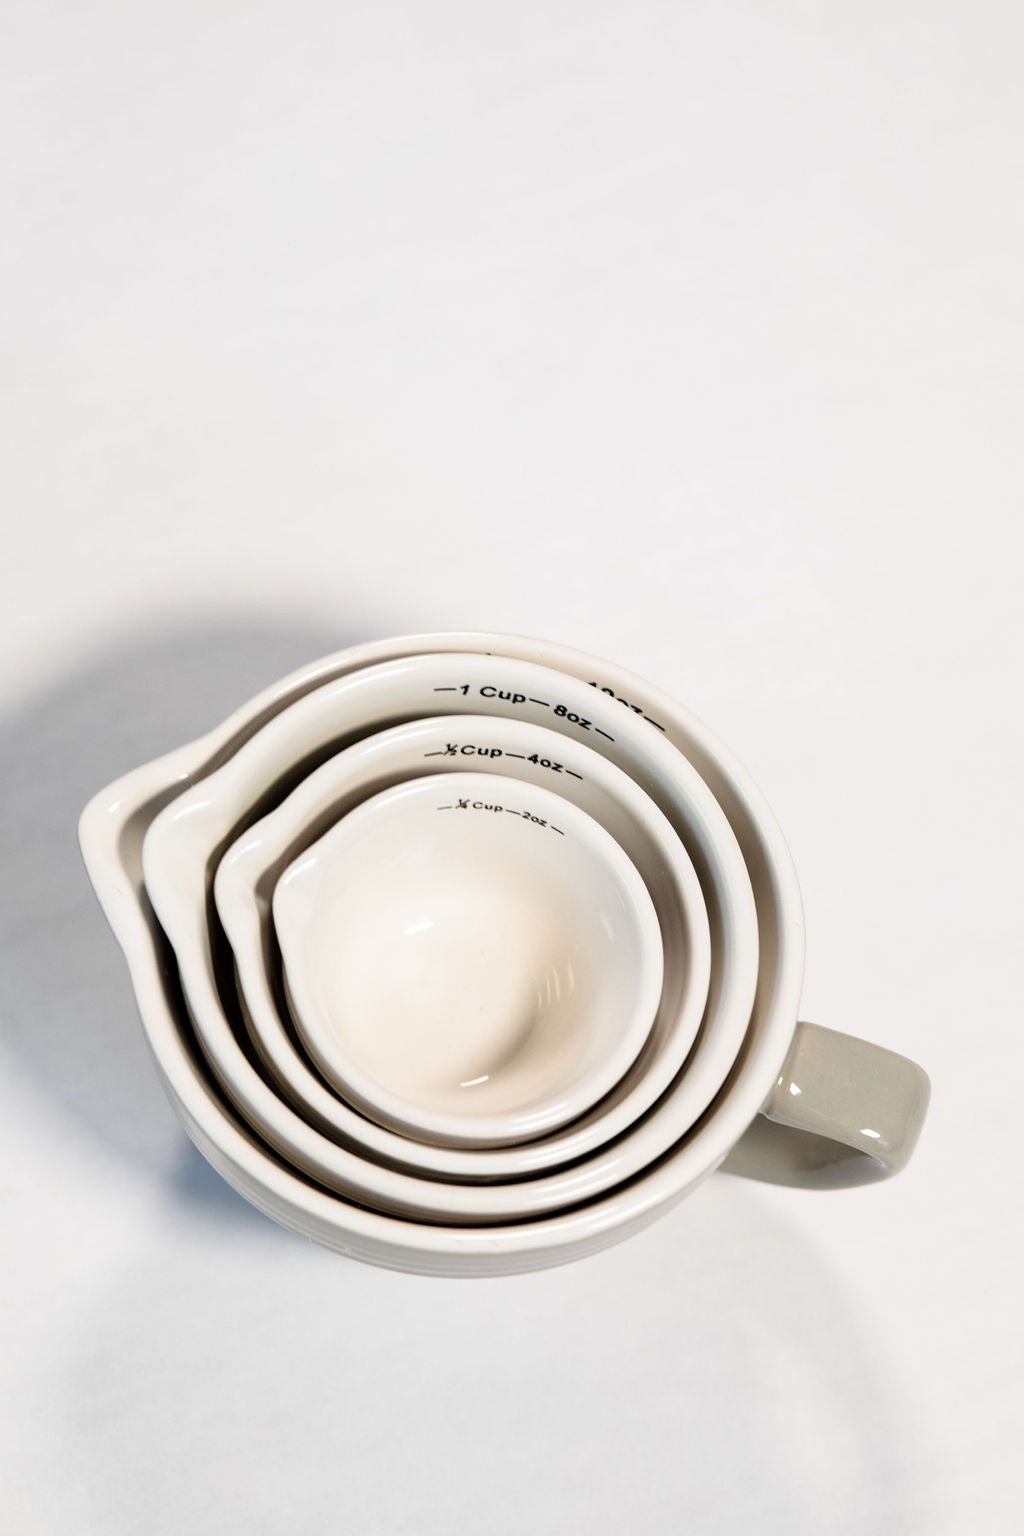 Black and White Stoneware Measuring Cups  Set of Four – Annie's Blue  Ribbon General Store